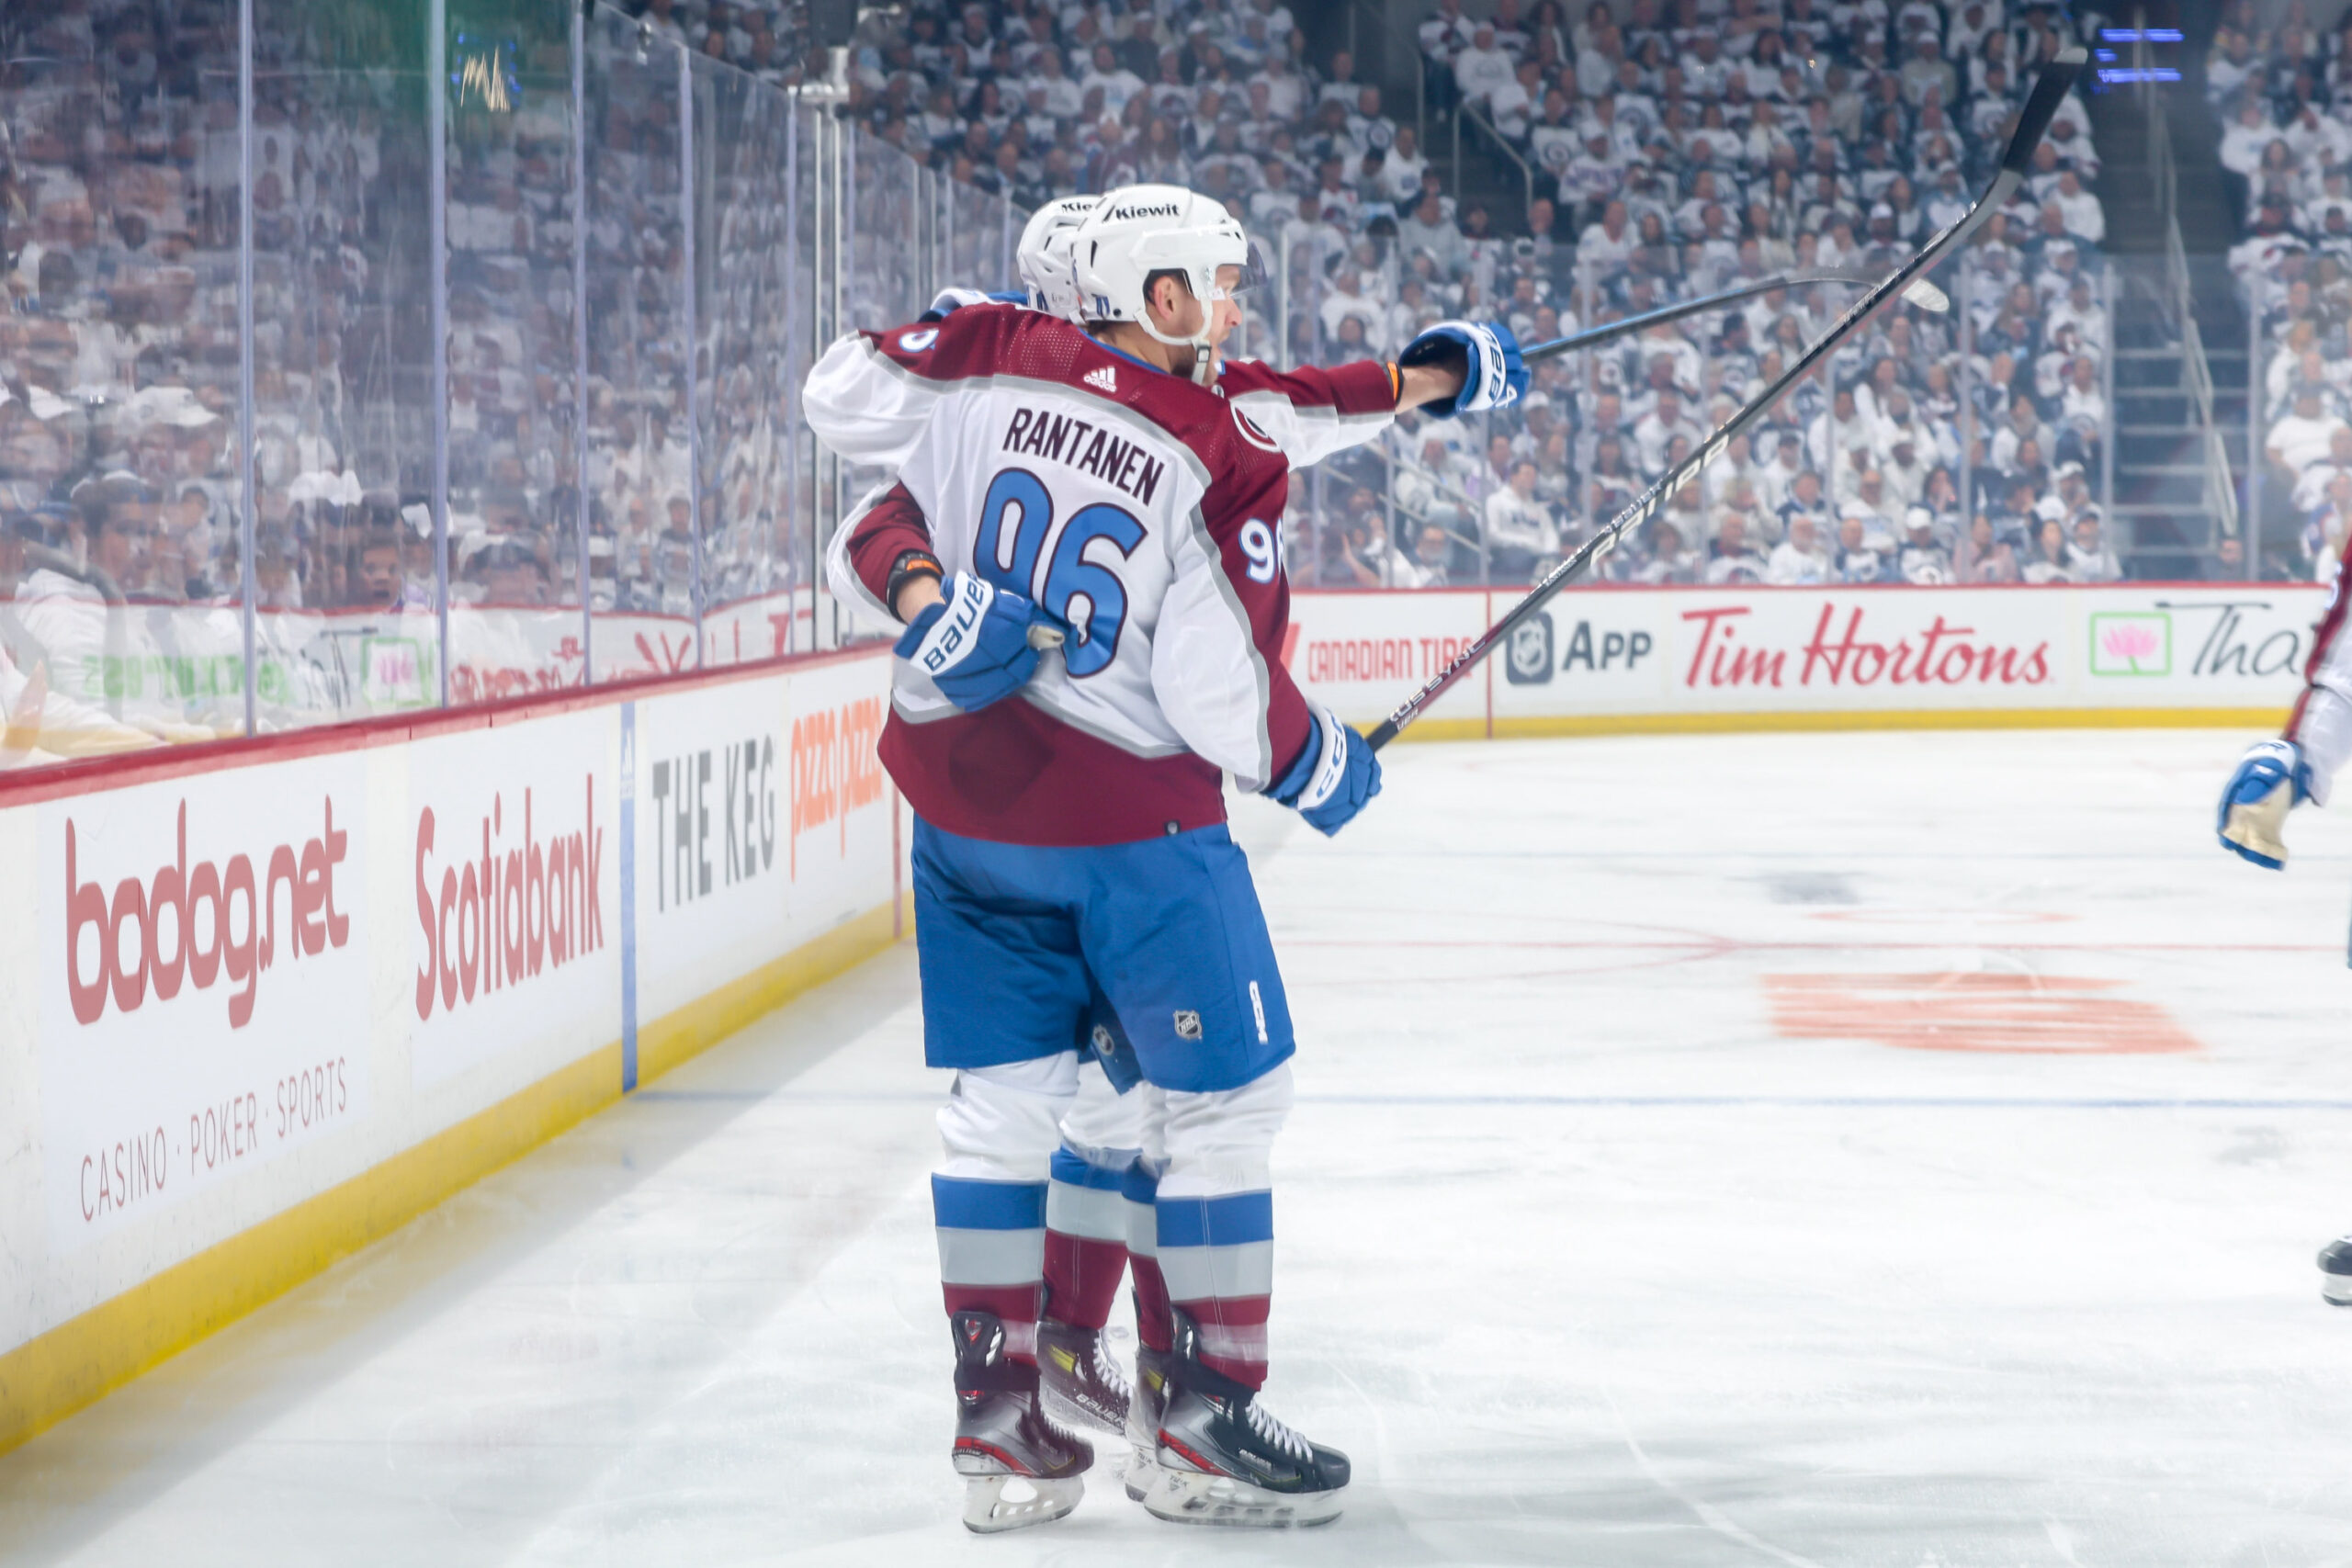 Colorado Avalanche Dominate Winnipeg Jets 6-3 in Game 5, Advance to Round 2